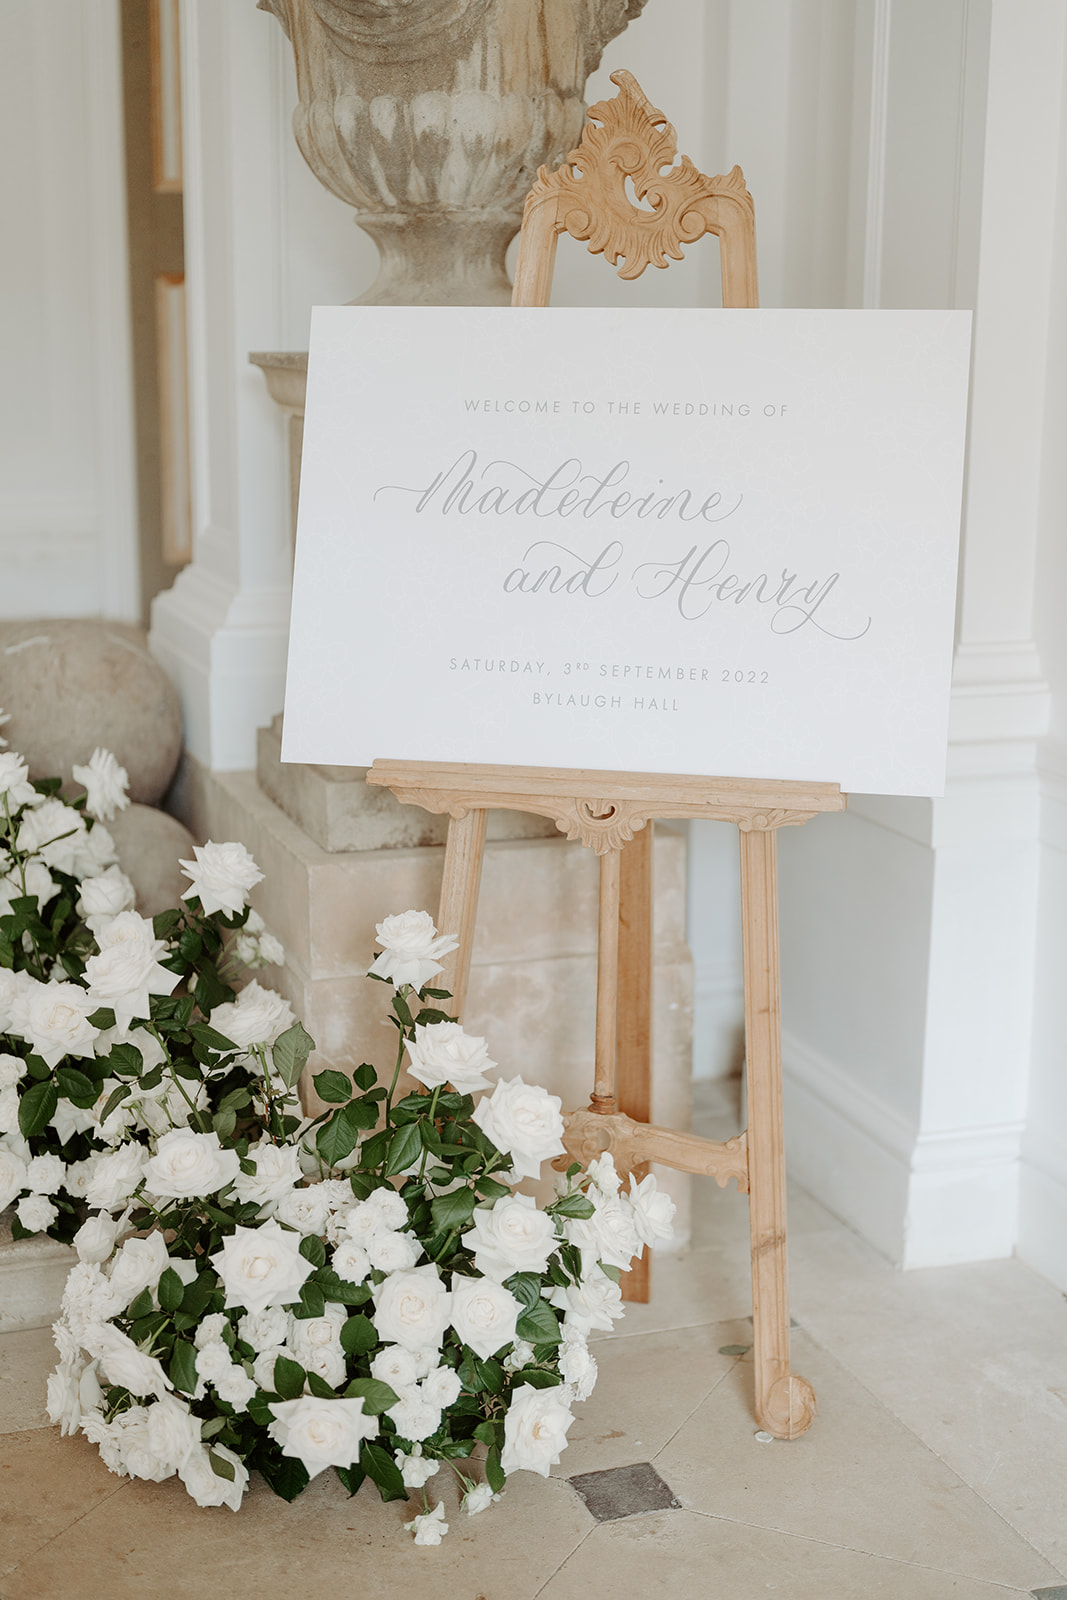 Bespoke welcome sign with calligraphy details